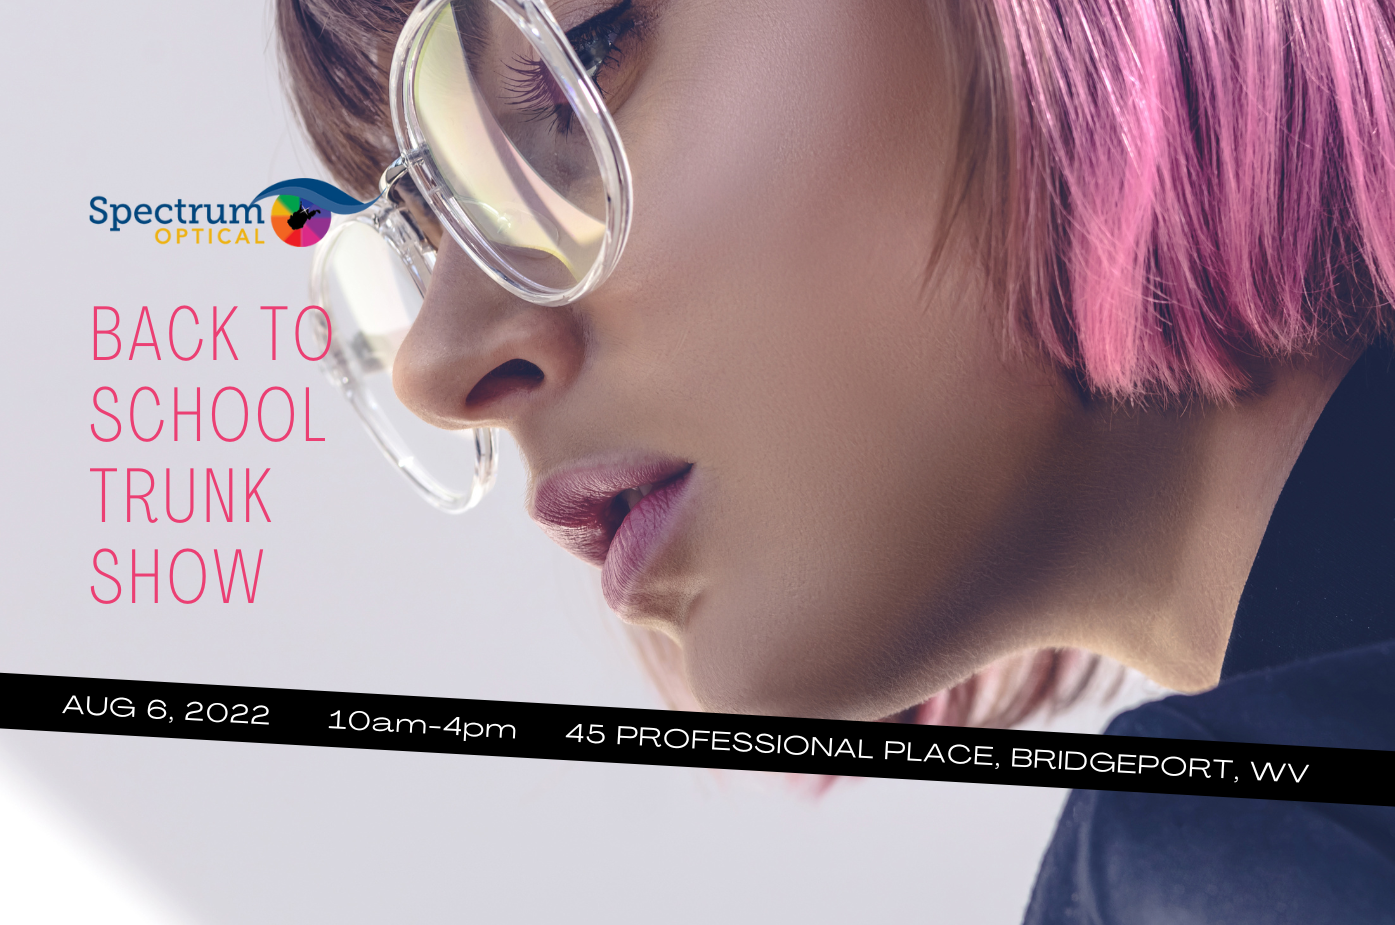 A girl with pink hair and clear eye glasses frames is shown behind pink text that announces a back to school trunk show